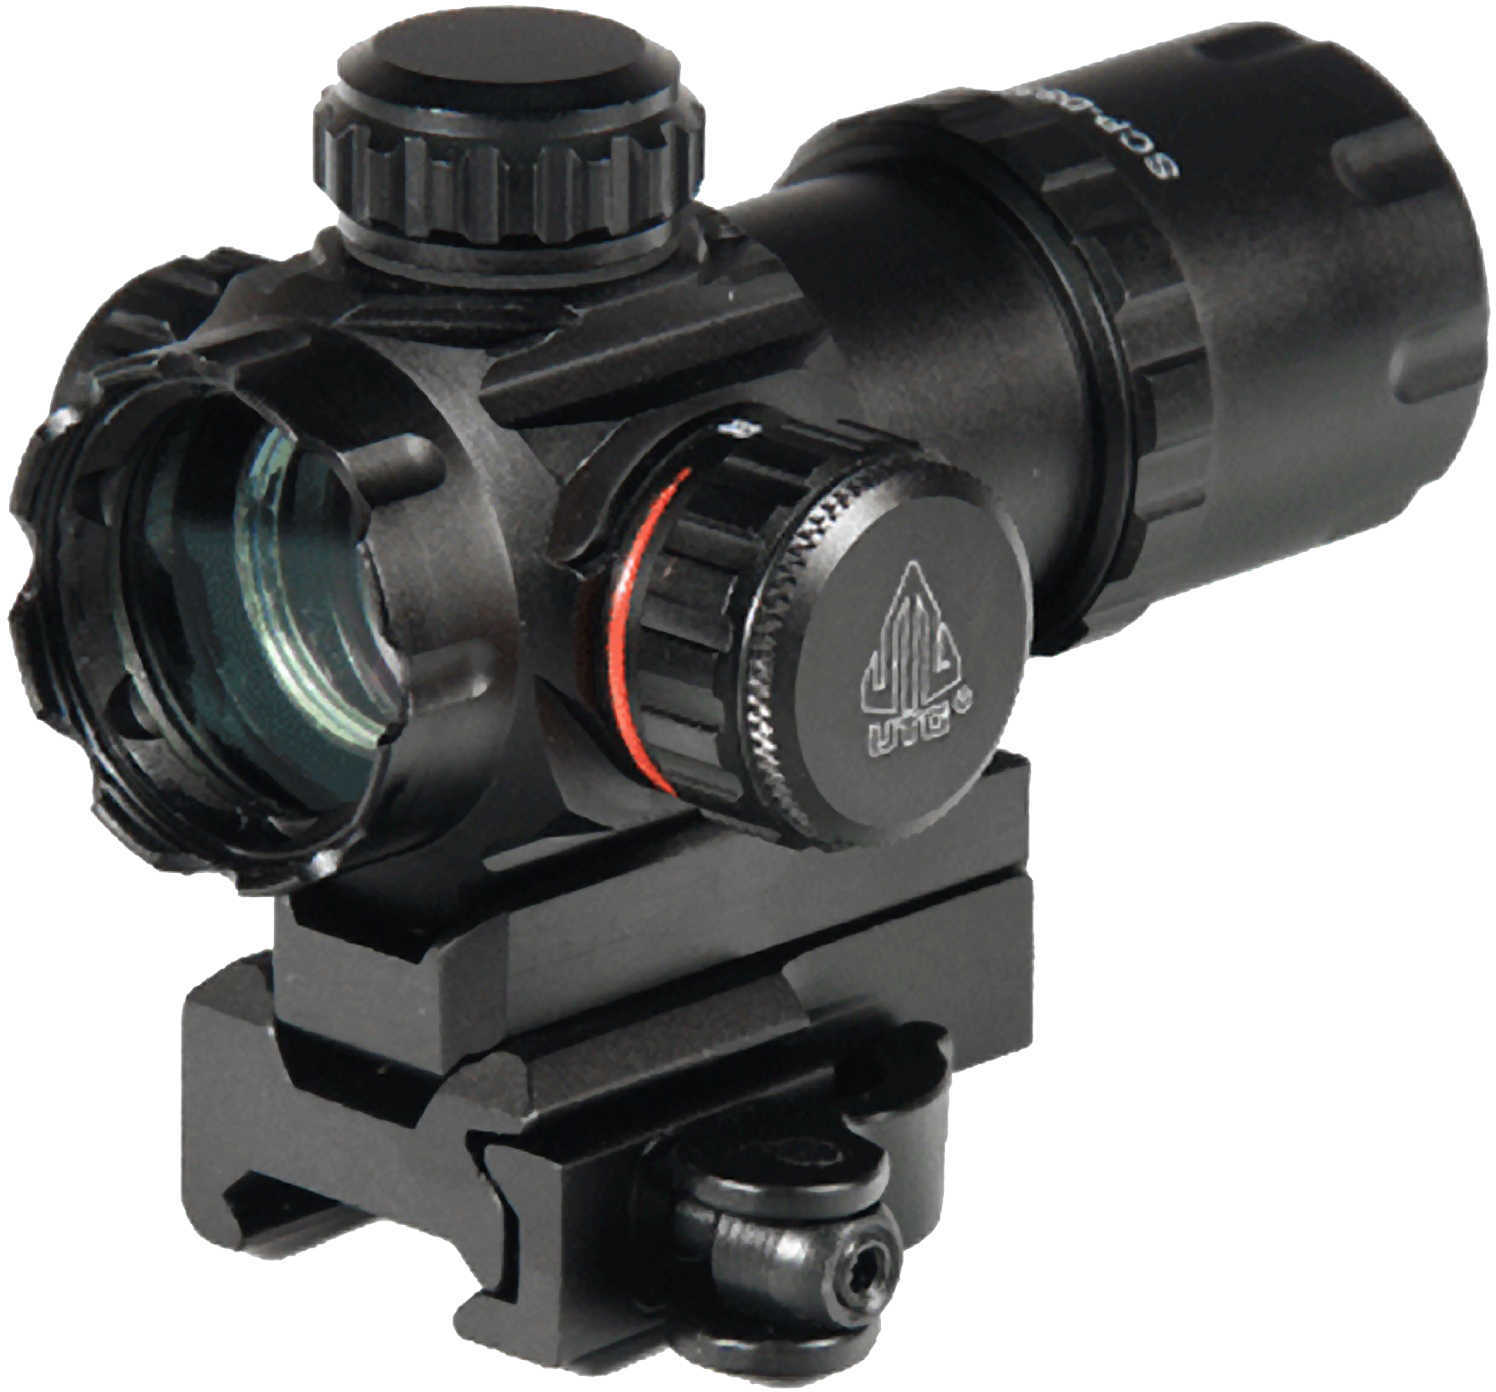 Leapers UTG 3.9" ITA Red/Green CQB Dot Sight with Integral QD Mount Md: SCPDS3039W